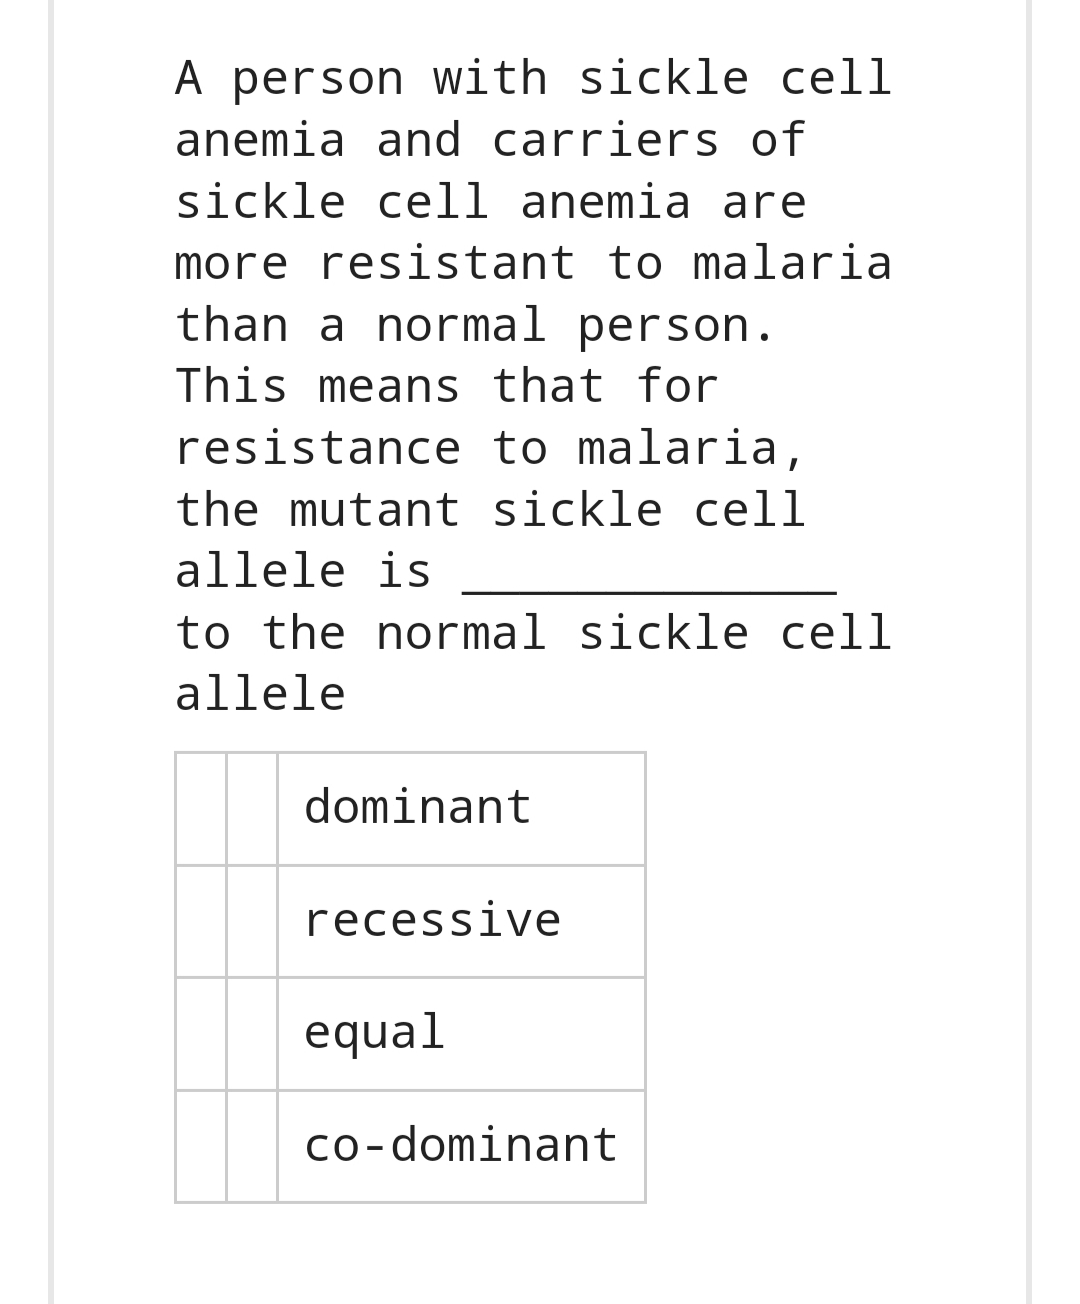 A person with sickle cell
anemia and carriers of
sickle cell anemia are
more resistant to malaria
than a normal person.
This means that for
resistance
the mutant sickle cell
allele is
to malaria,
to the normal sickle cell
allele
dominant
recessive
equal
co-dominant